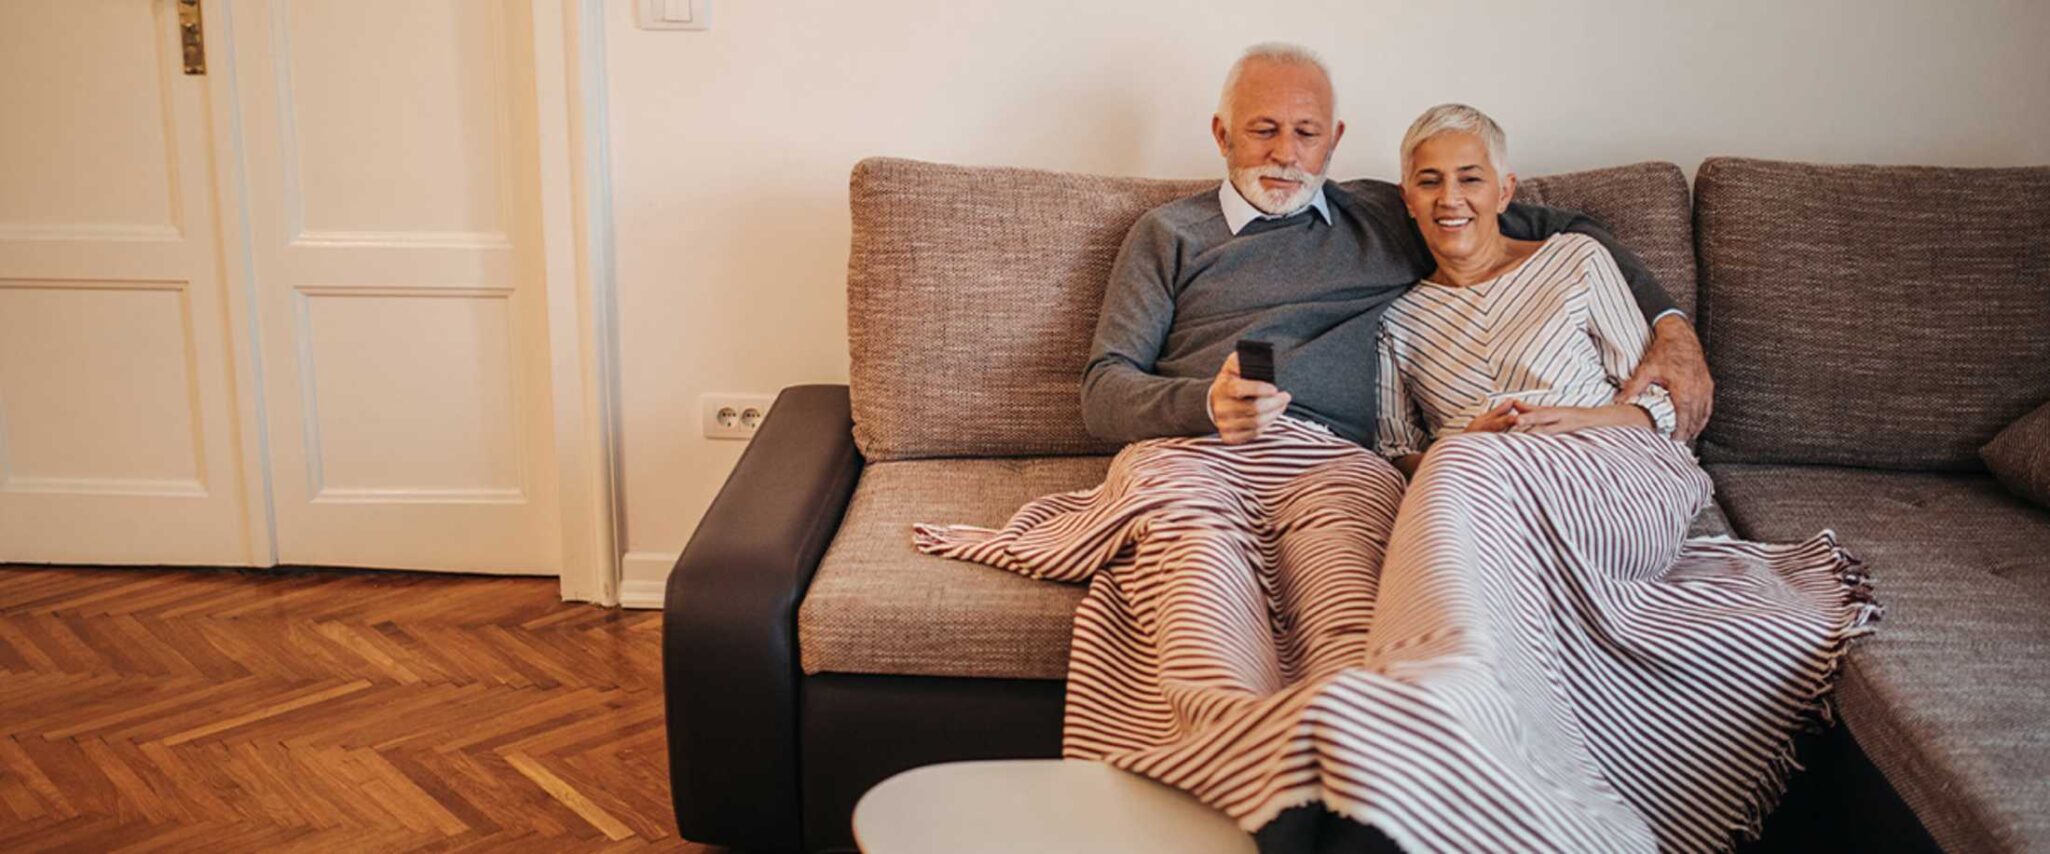 senior couple watching a movie on the couch